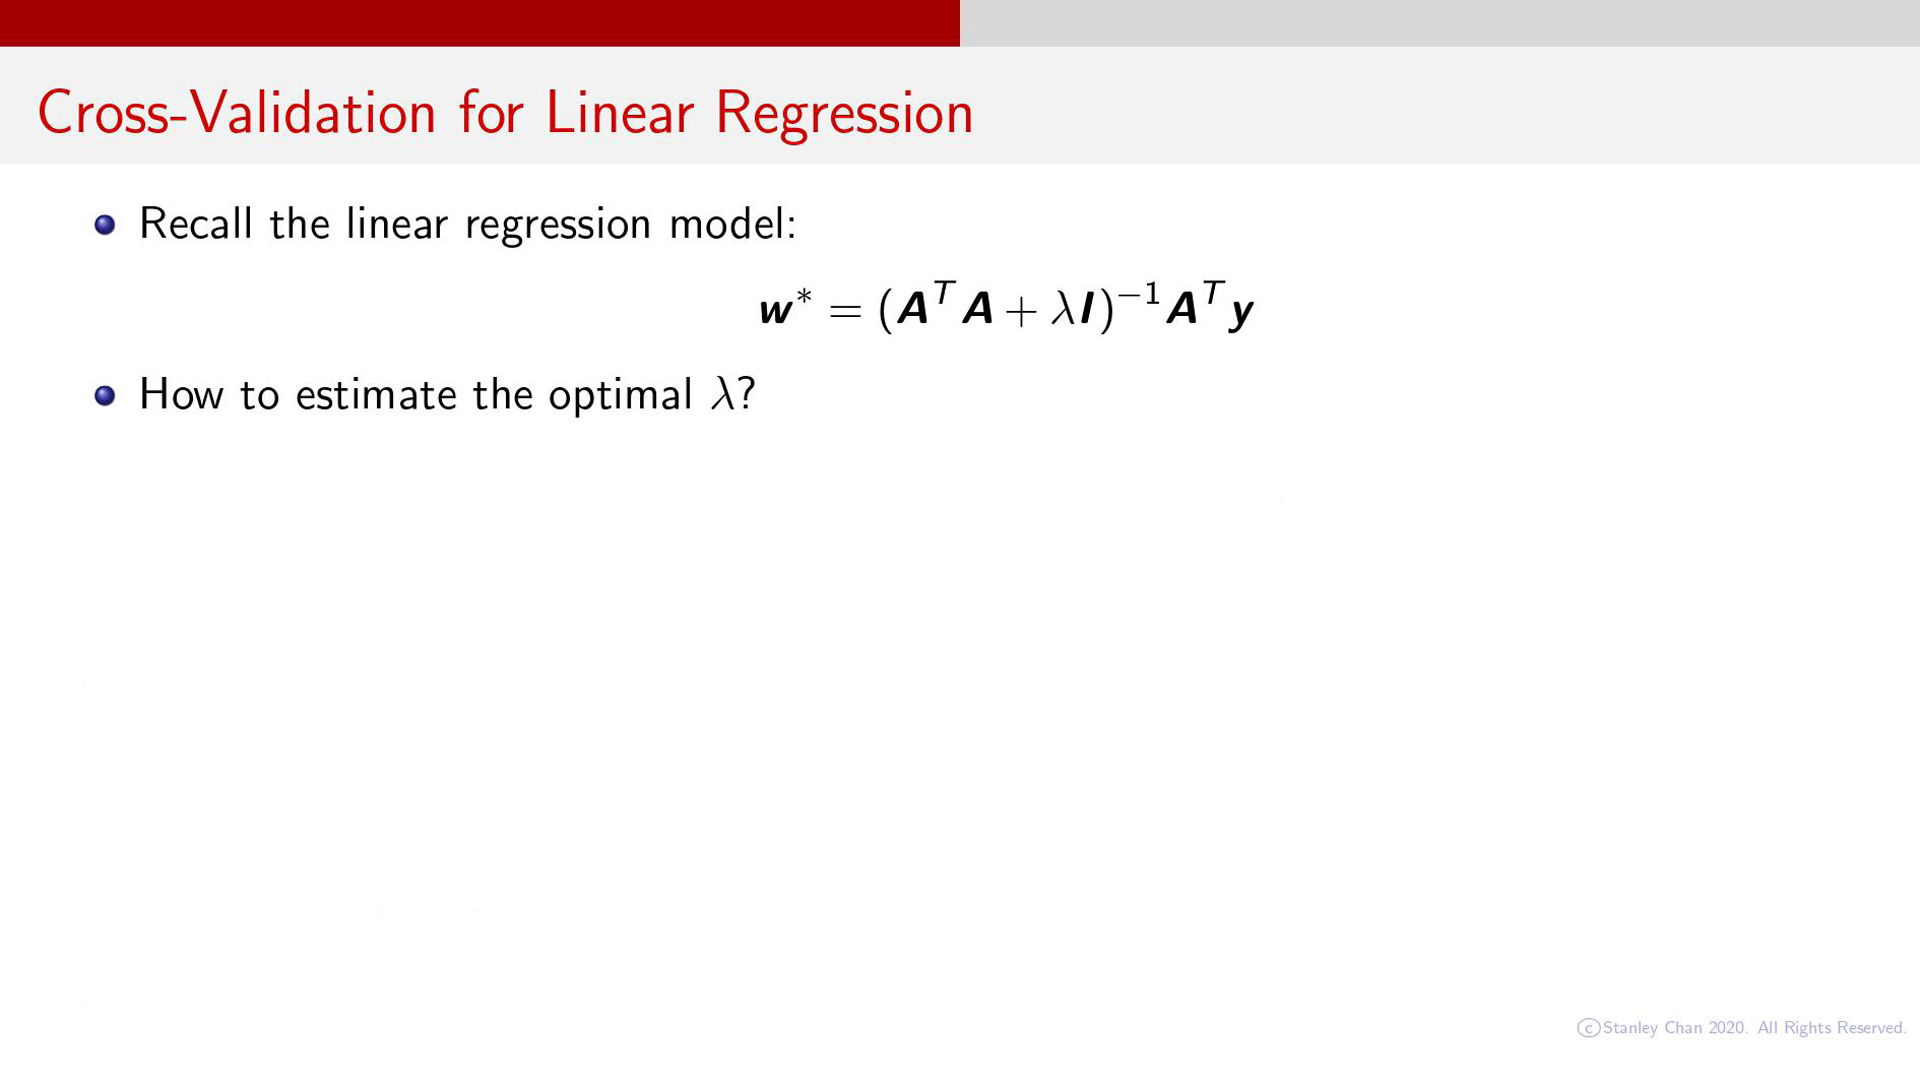 Cross-Validation for Linear Regression